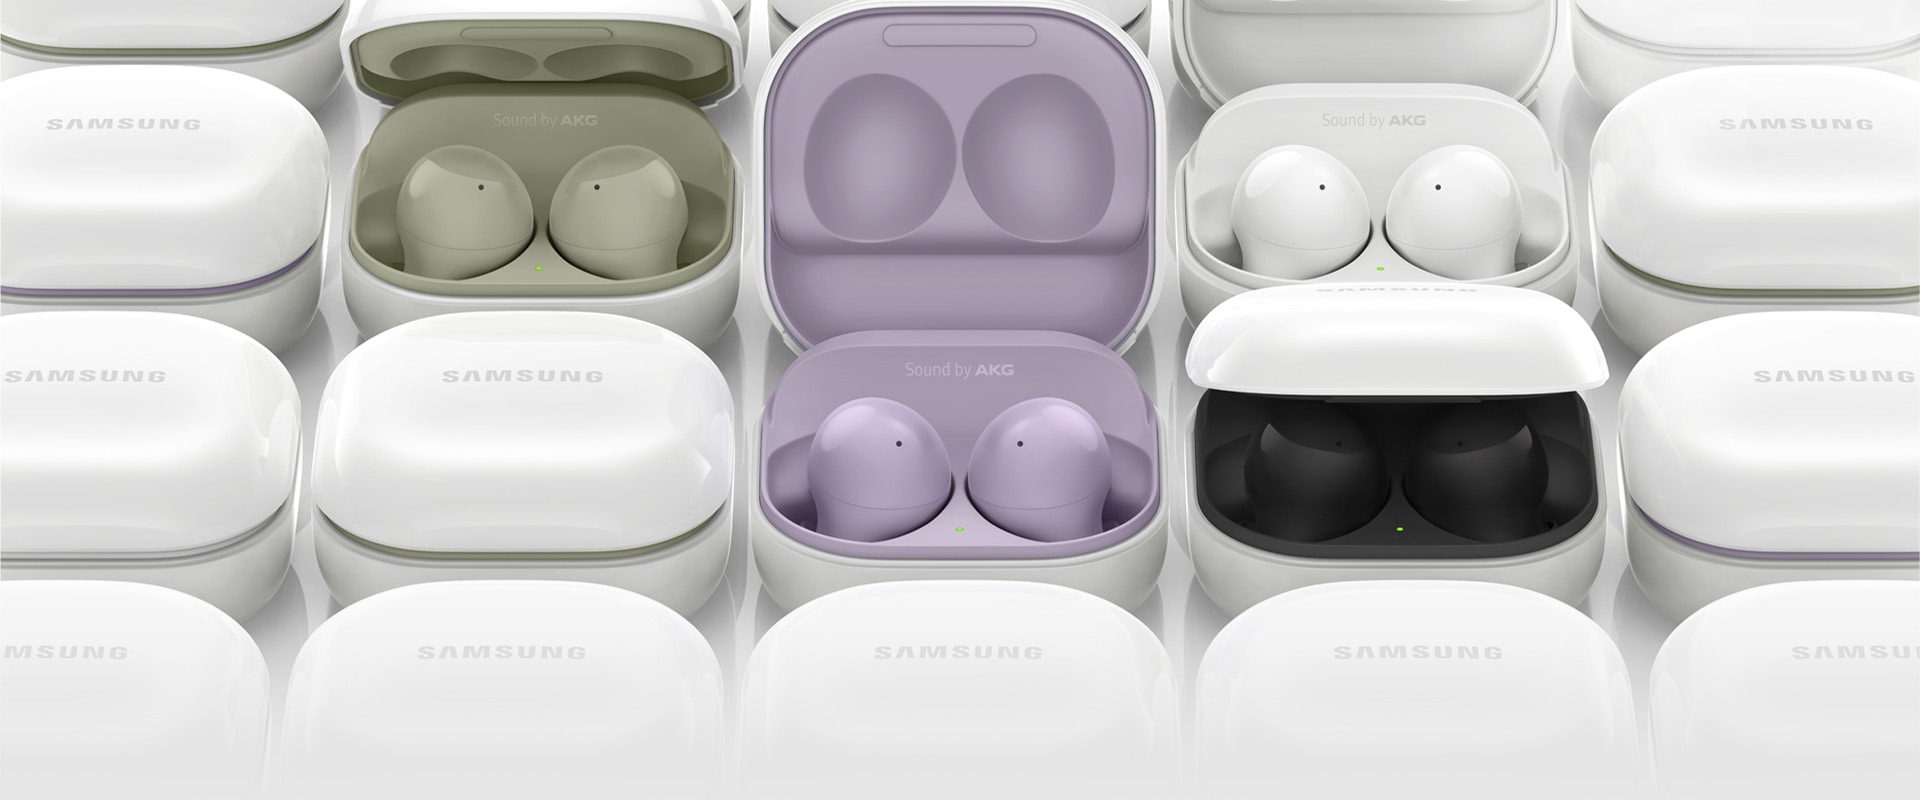 Galaxy Buds2 cases are placed next to each other. Several of the cases are opened, each showing different colors of the inside case, from olive, lavender, white, to graphite.